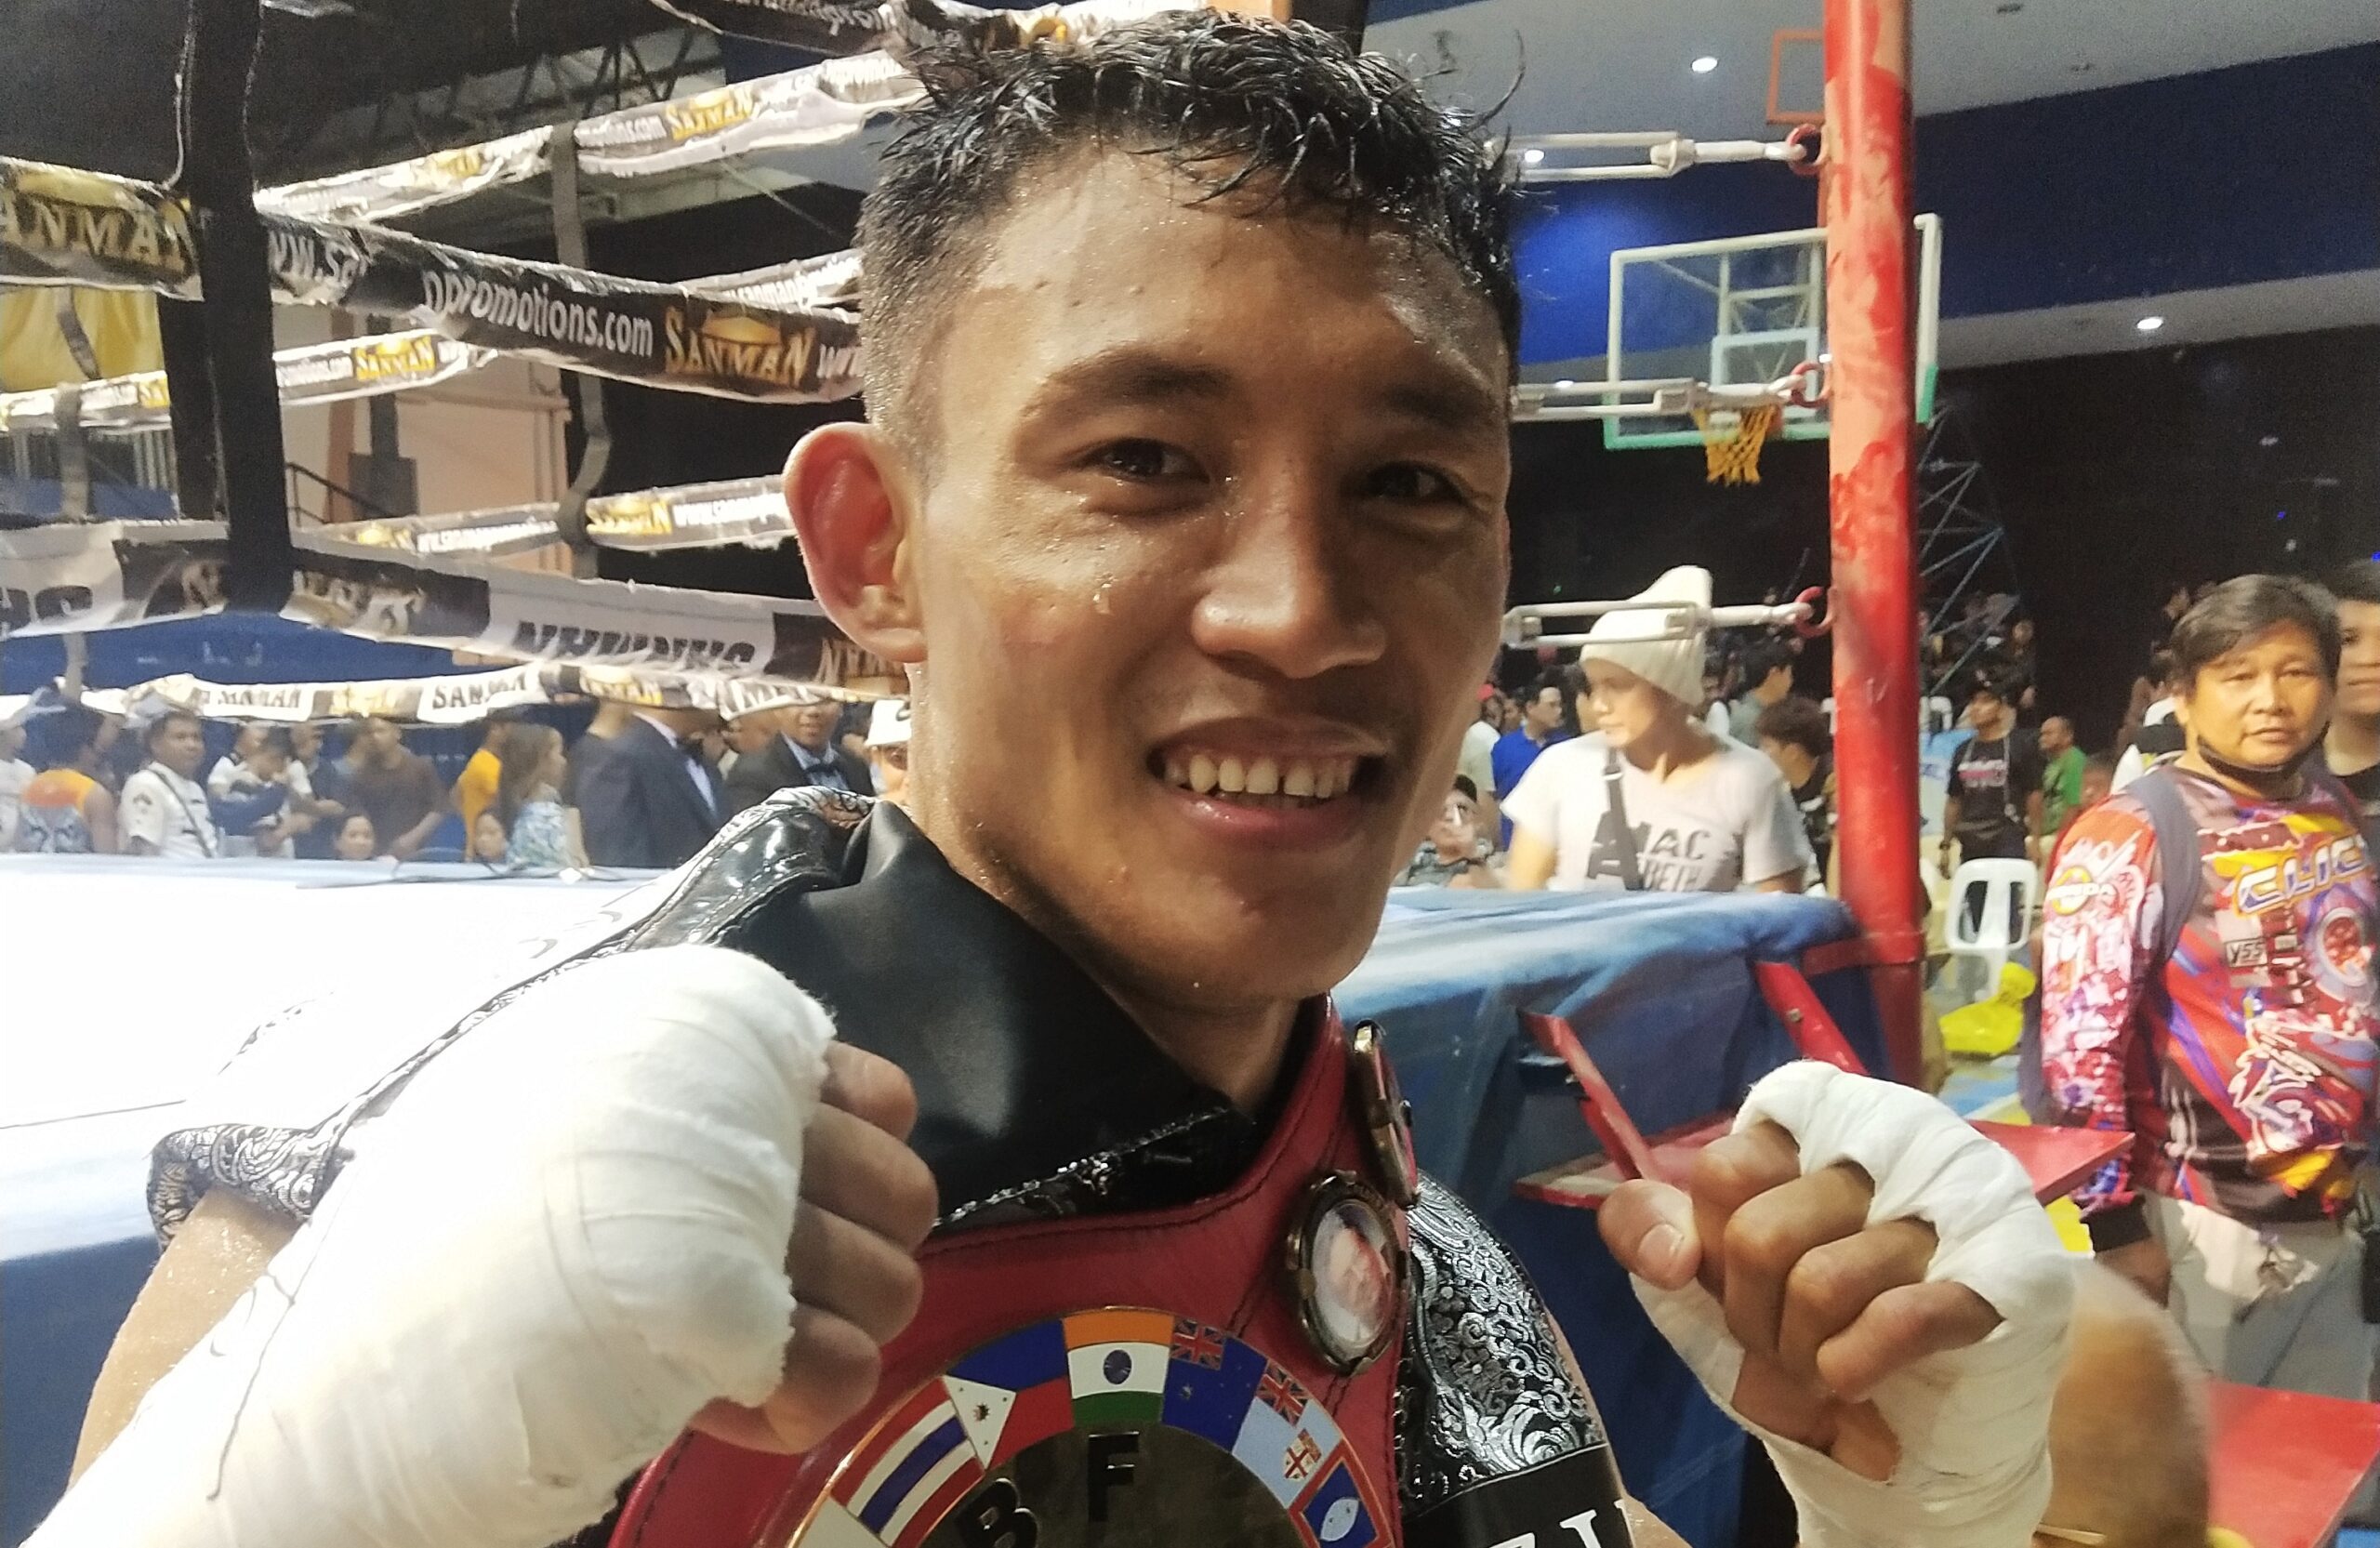 KJ Cataraja bags OPBF crown, braces for crack at world title